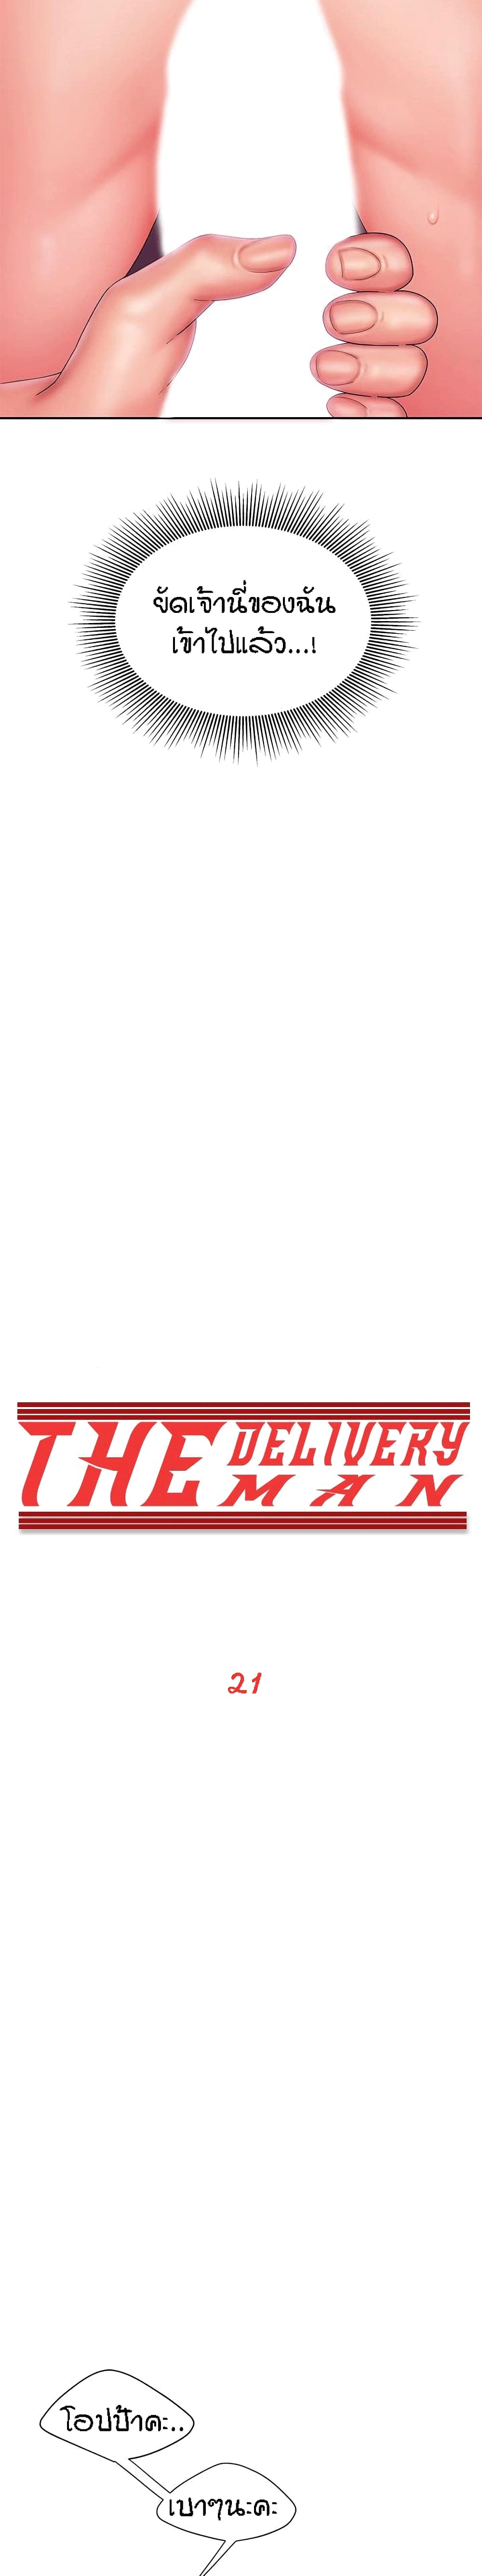 Delivery Man 21-21